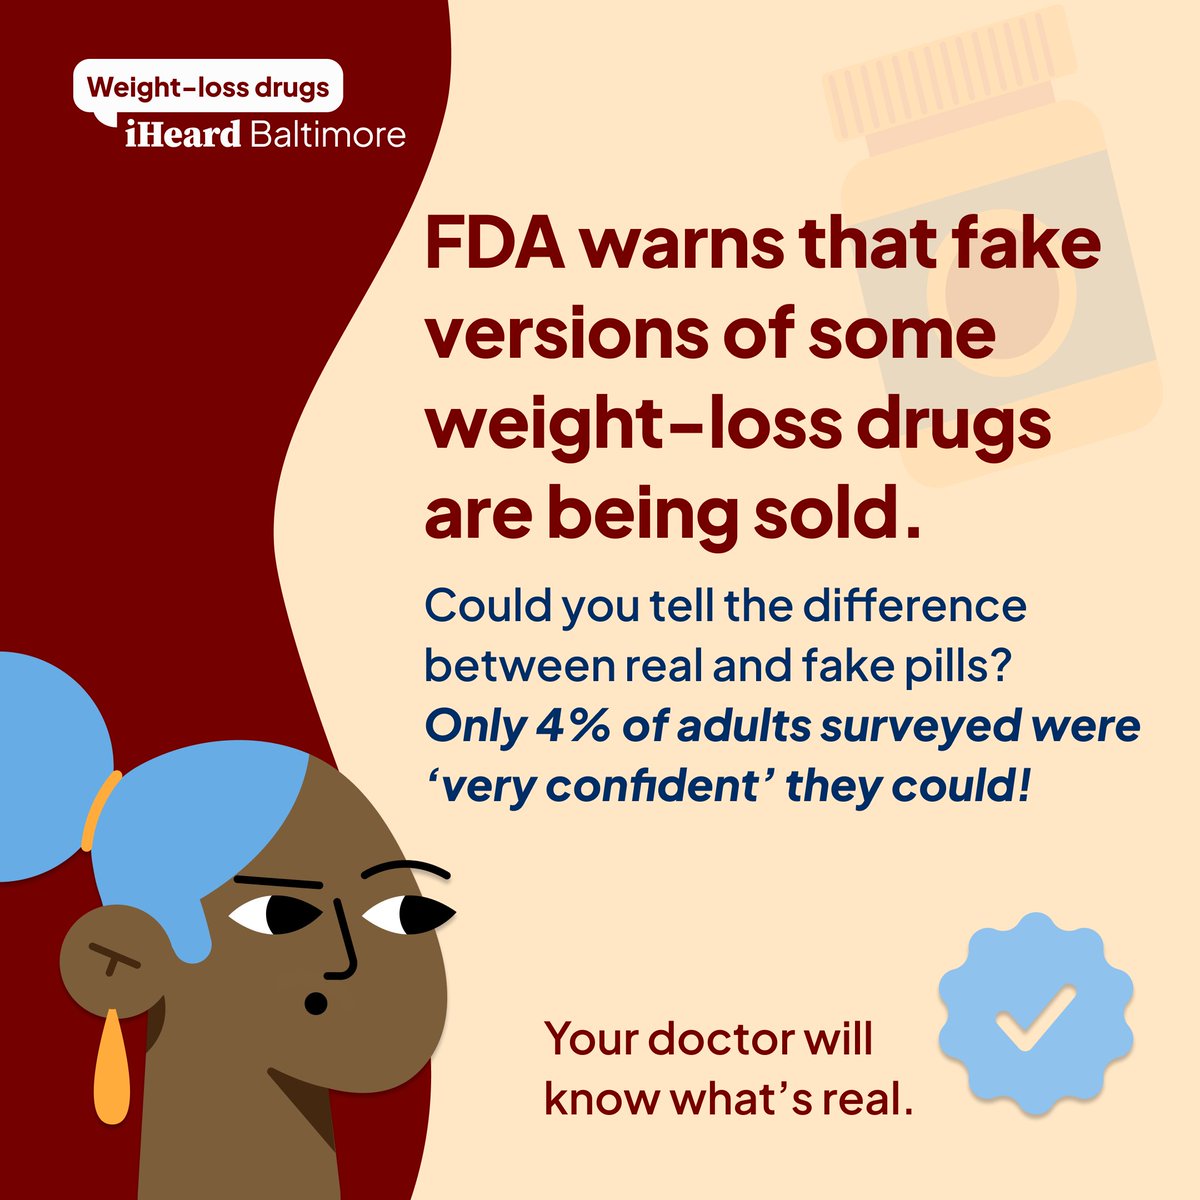 It’s okay to have questions about weight-loss medicines. Look to sources like your doctor, Mayo Clinic, and MedlinePlus to learn more. #iHeardBaltimore #WeightLossDrugs #StayAware #PublicHealthEducation